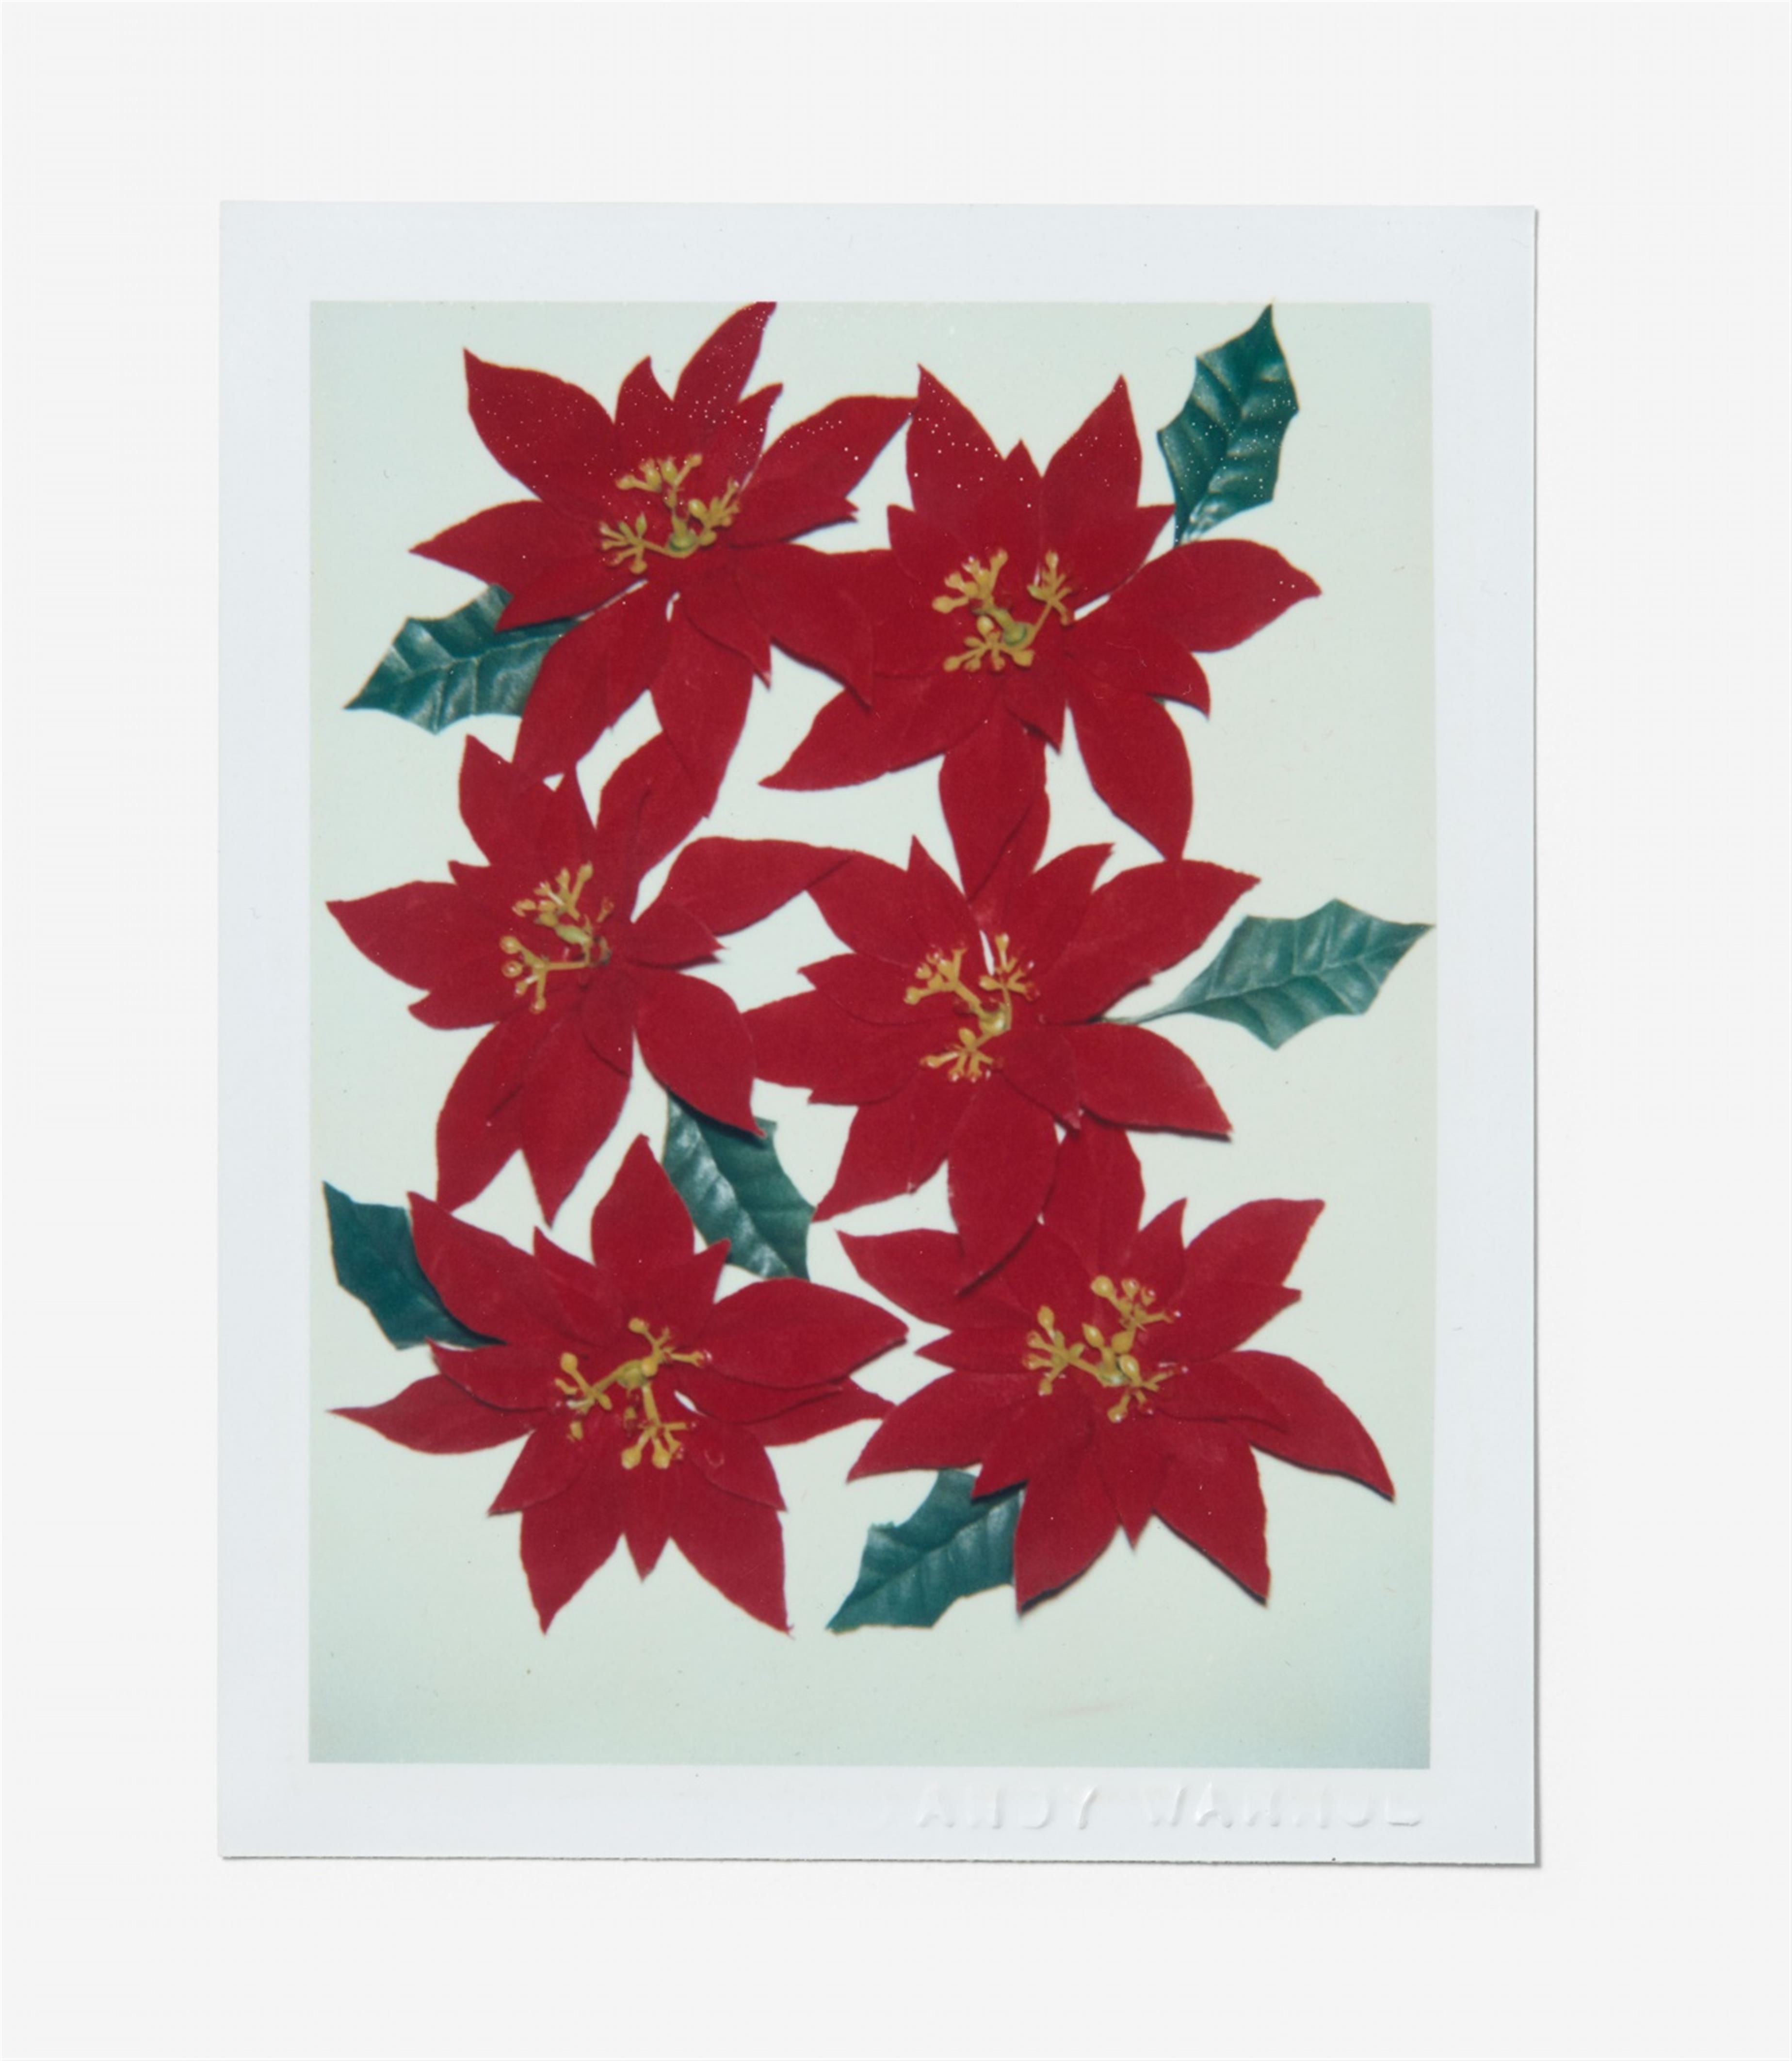 Andy Warhol - Poinsettias - image-1